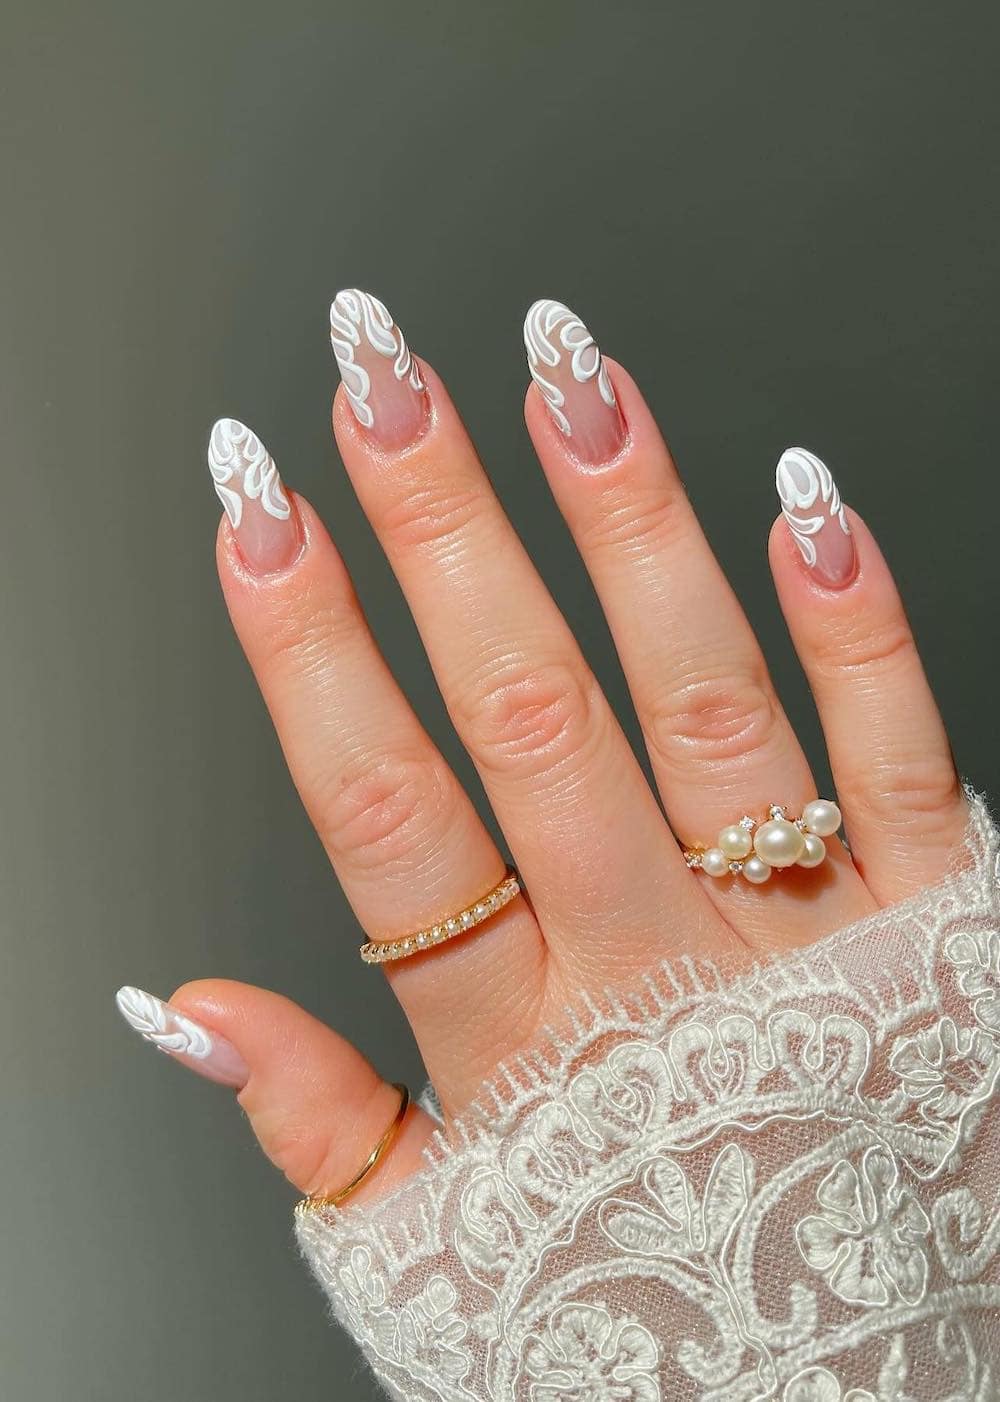 A hand with medium nude almond nails with white petal tips